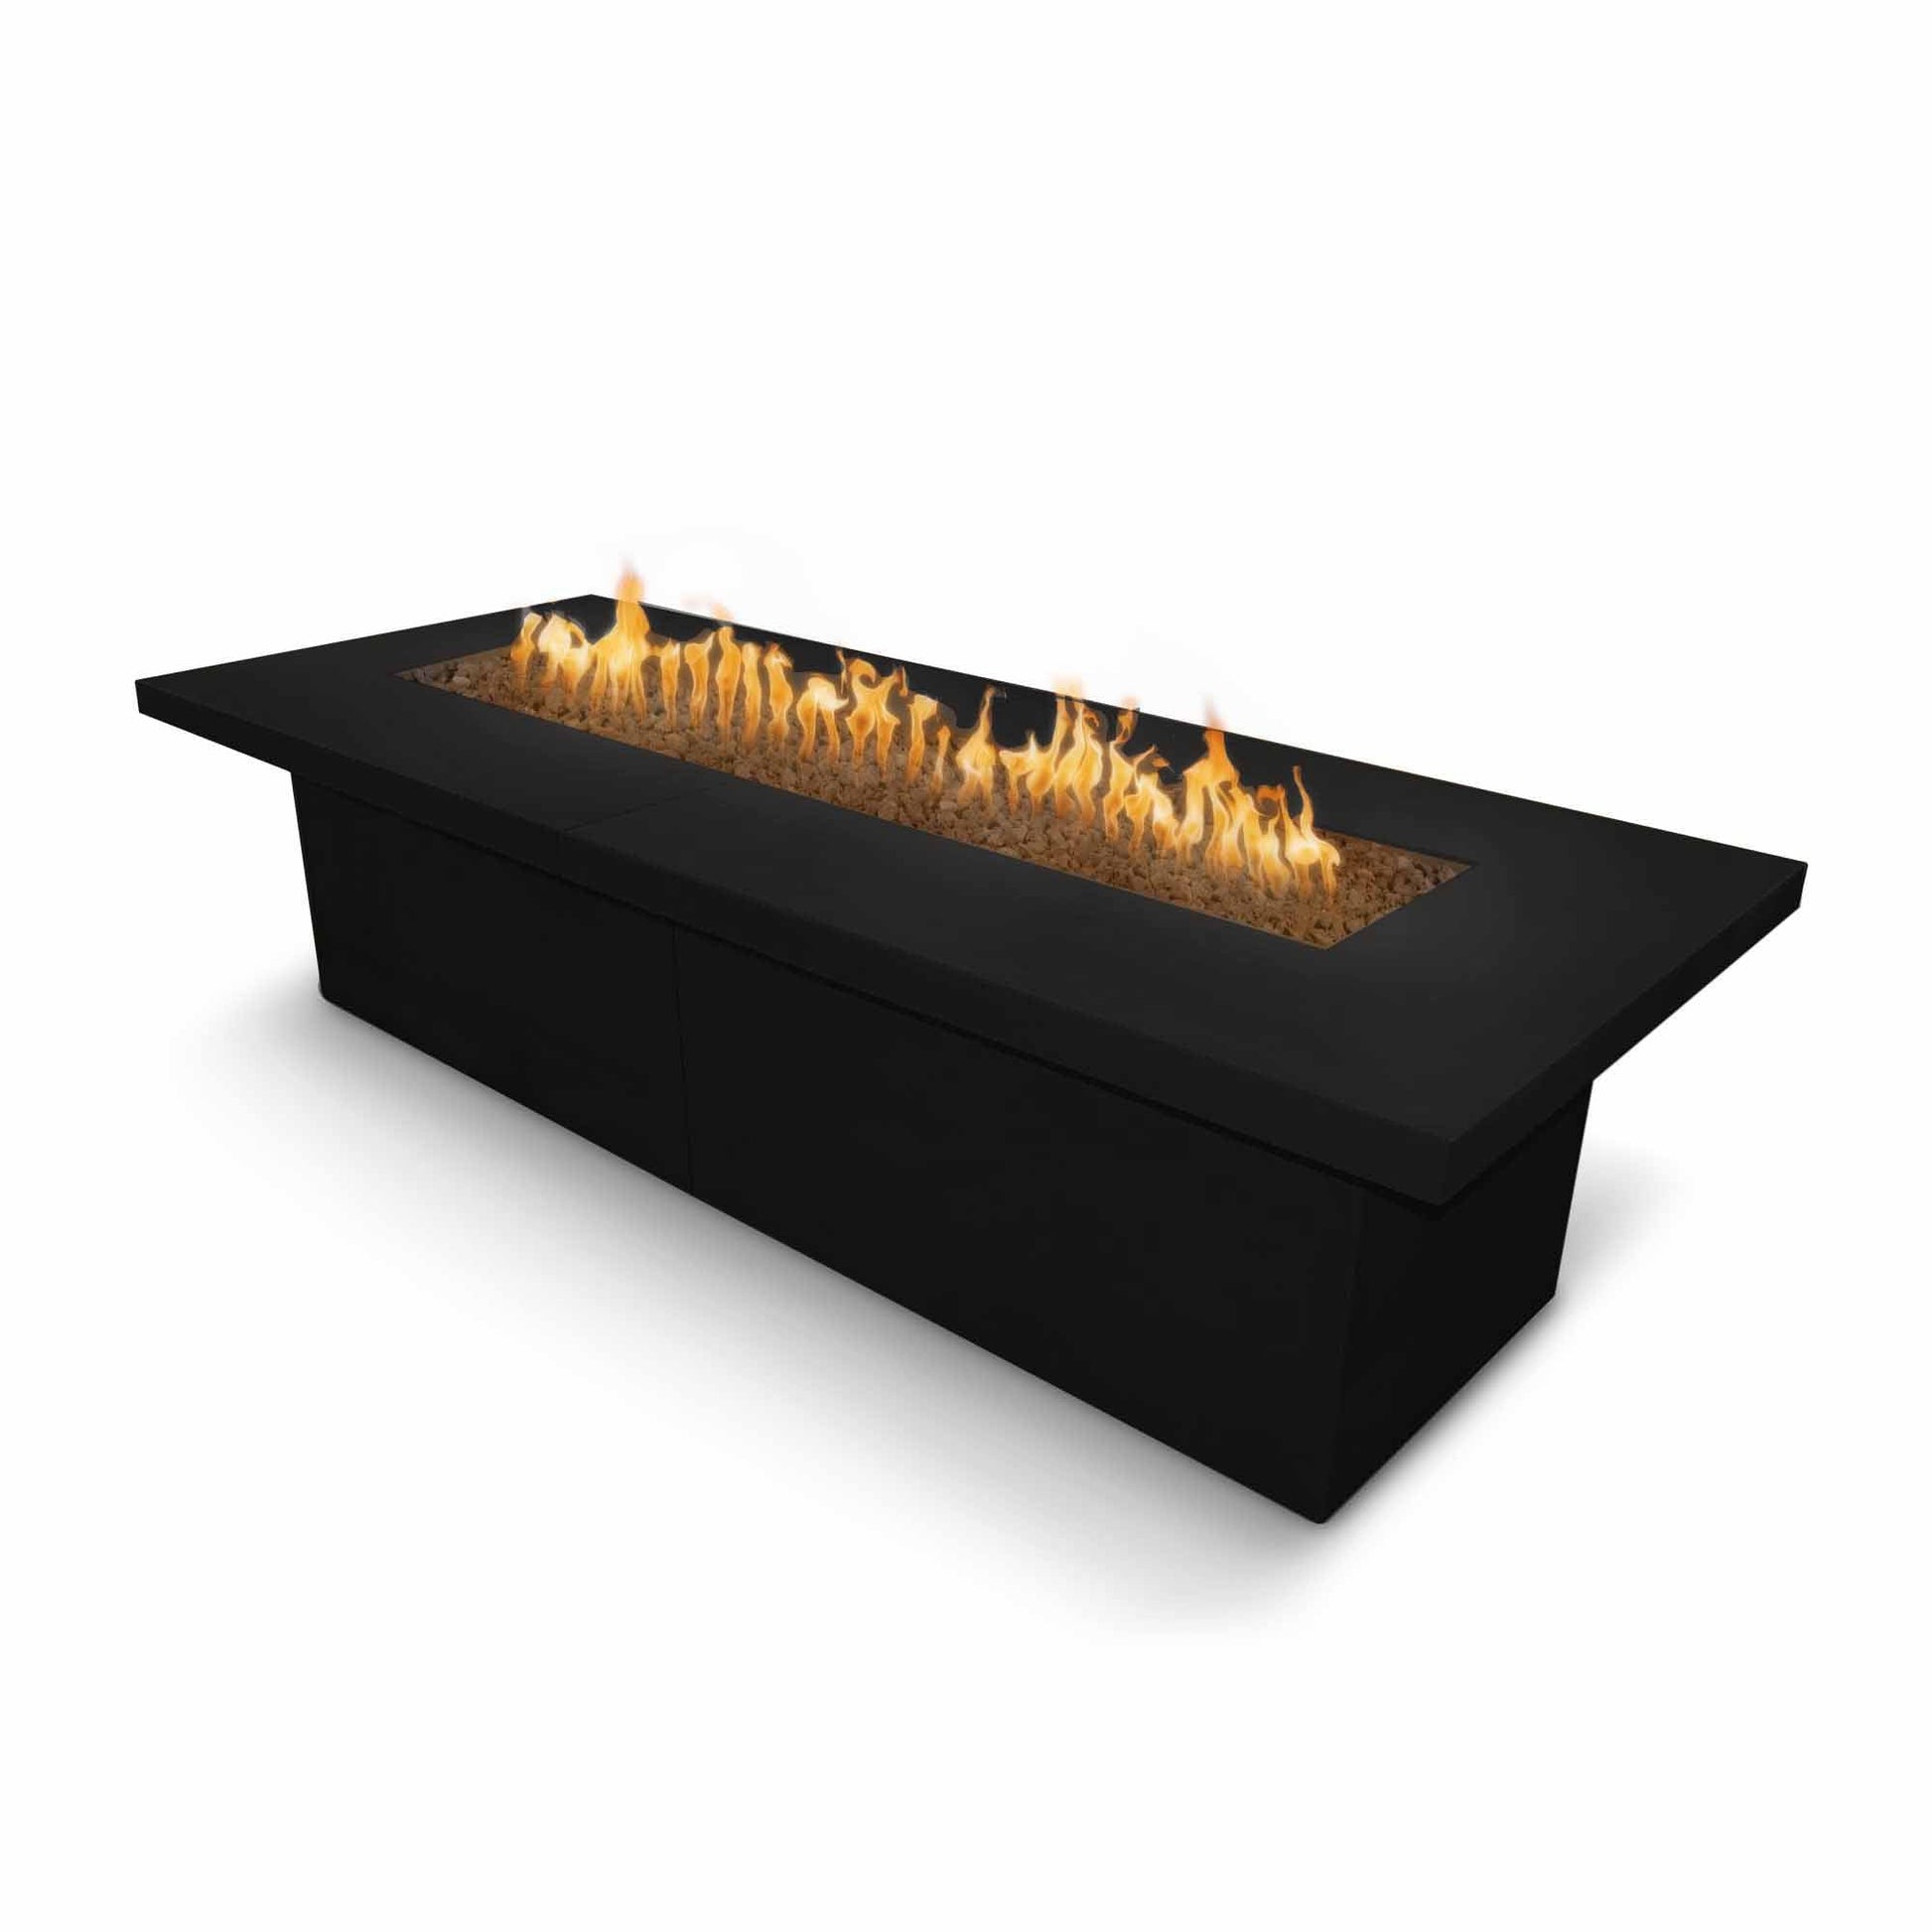 The Outdoor Plus Rectangular Newport 120" Stainless Steel Liquid Propane Fire Pit with Match Lit with Flame Sense Ignition